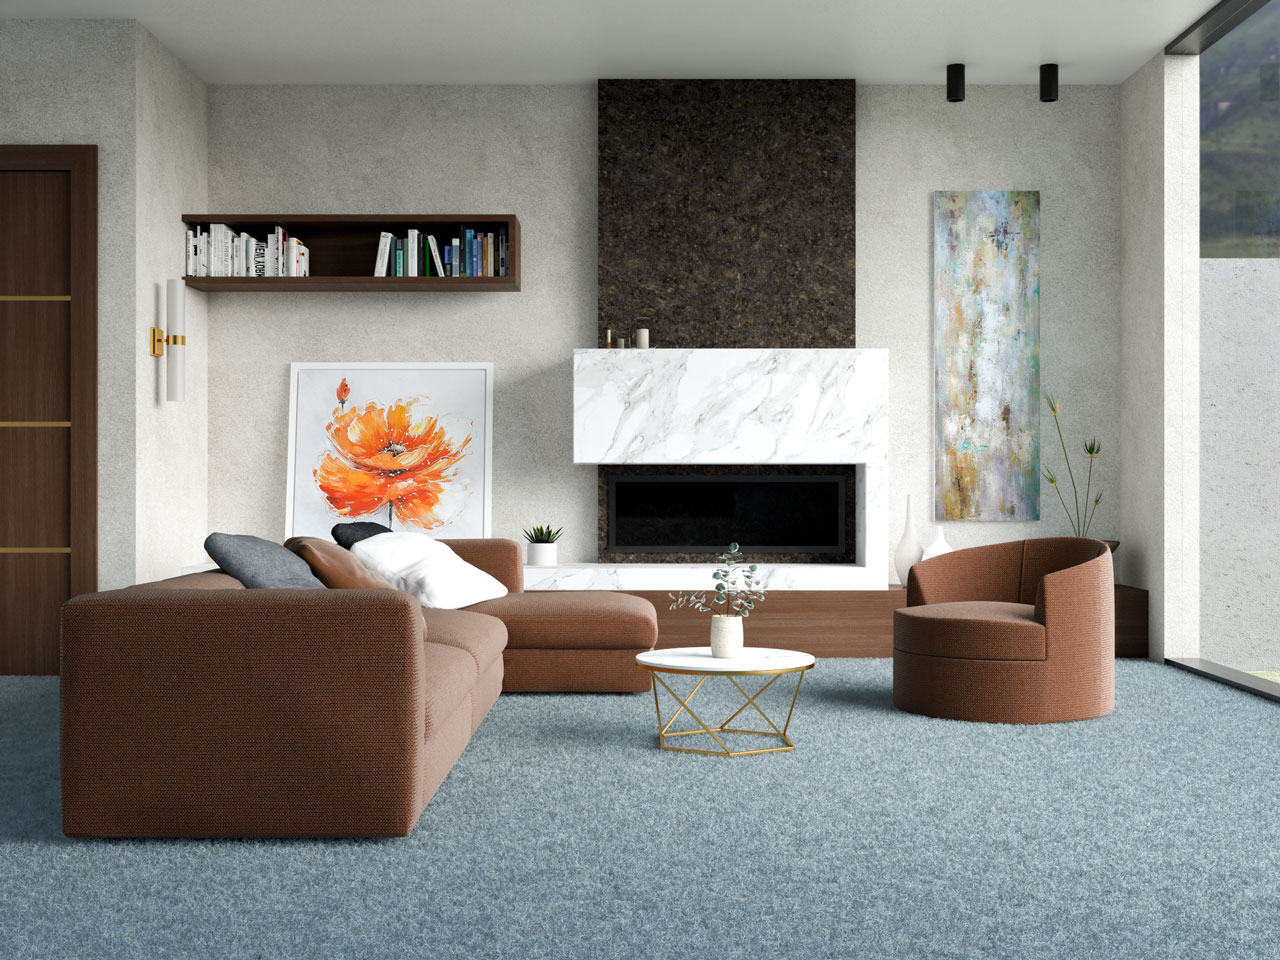 Carpet Ideas: 12 Looks To Create Warmth, Texture And Style Underfoot